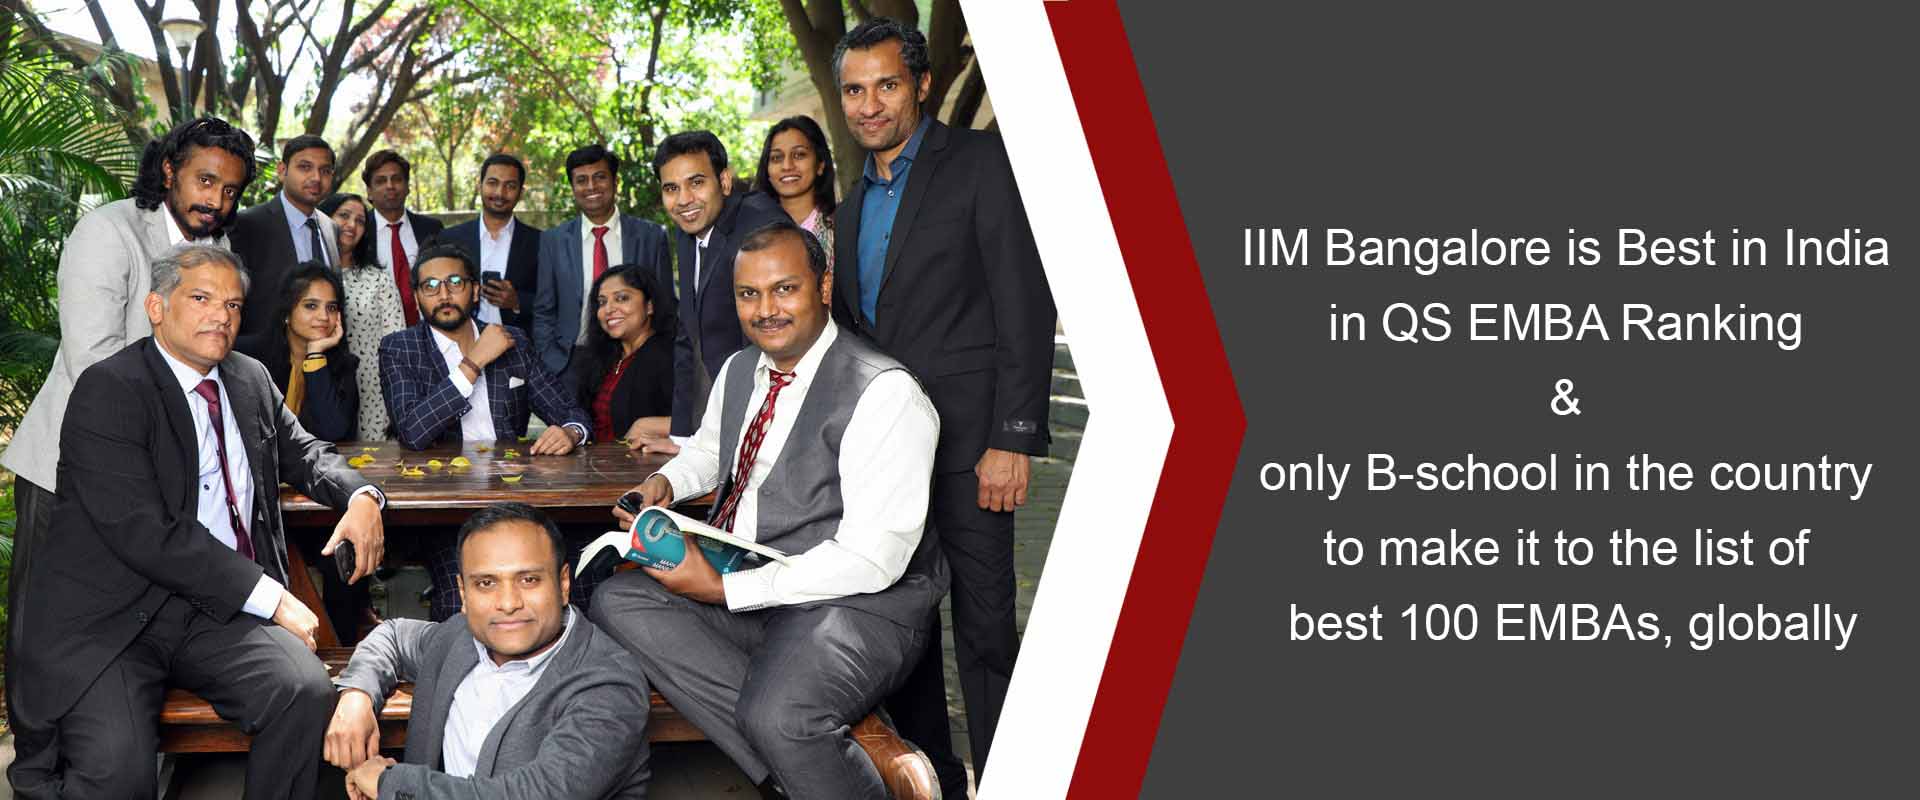 IIM Bangalore is Best in India in QS EMBA Ranking & only B-school in the country to make it to the list of best 100 EMBAs, globally